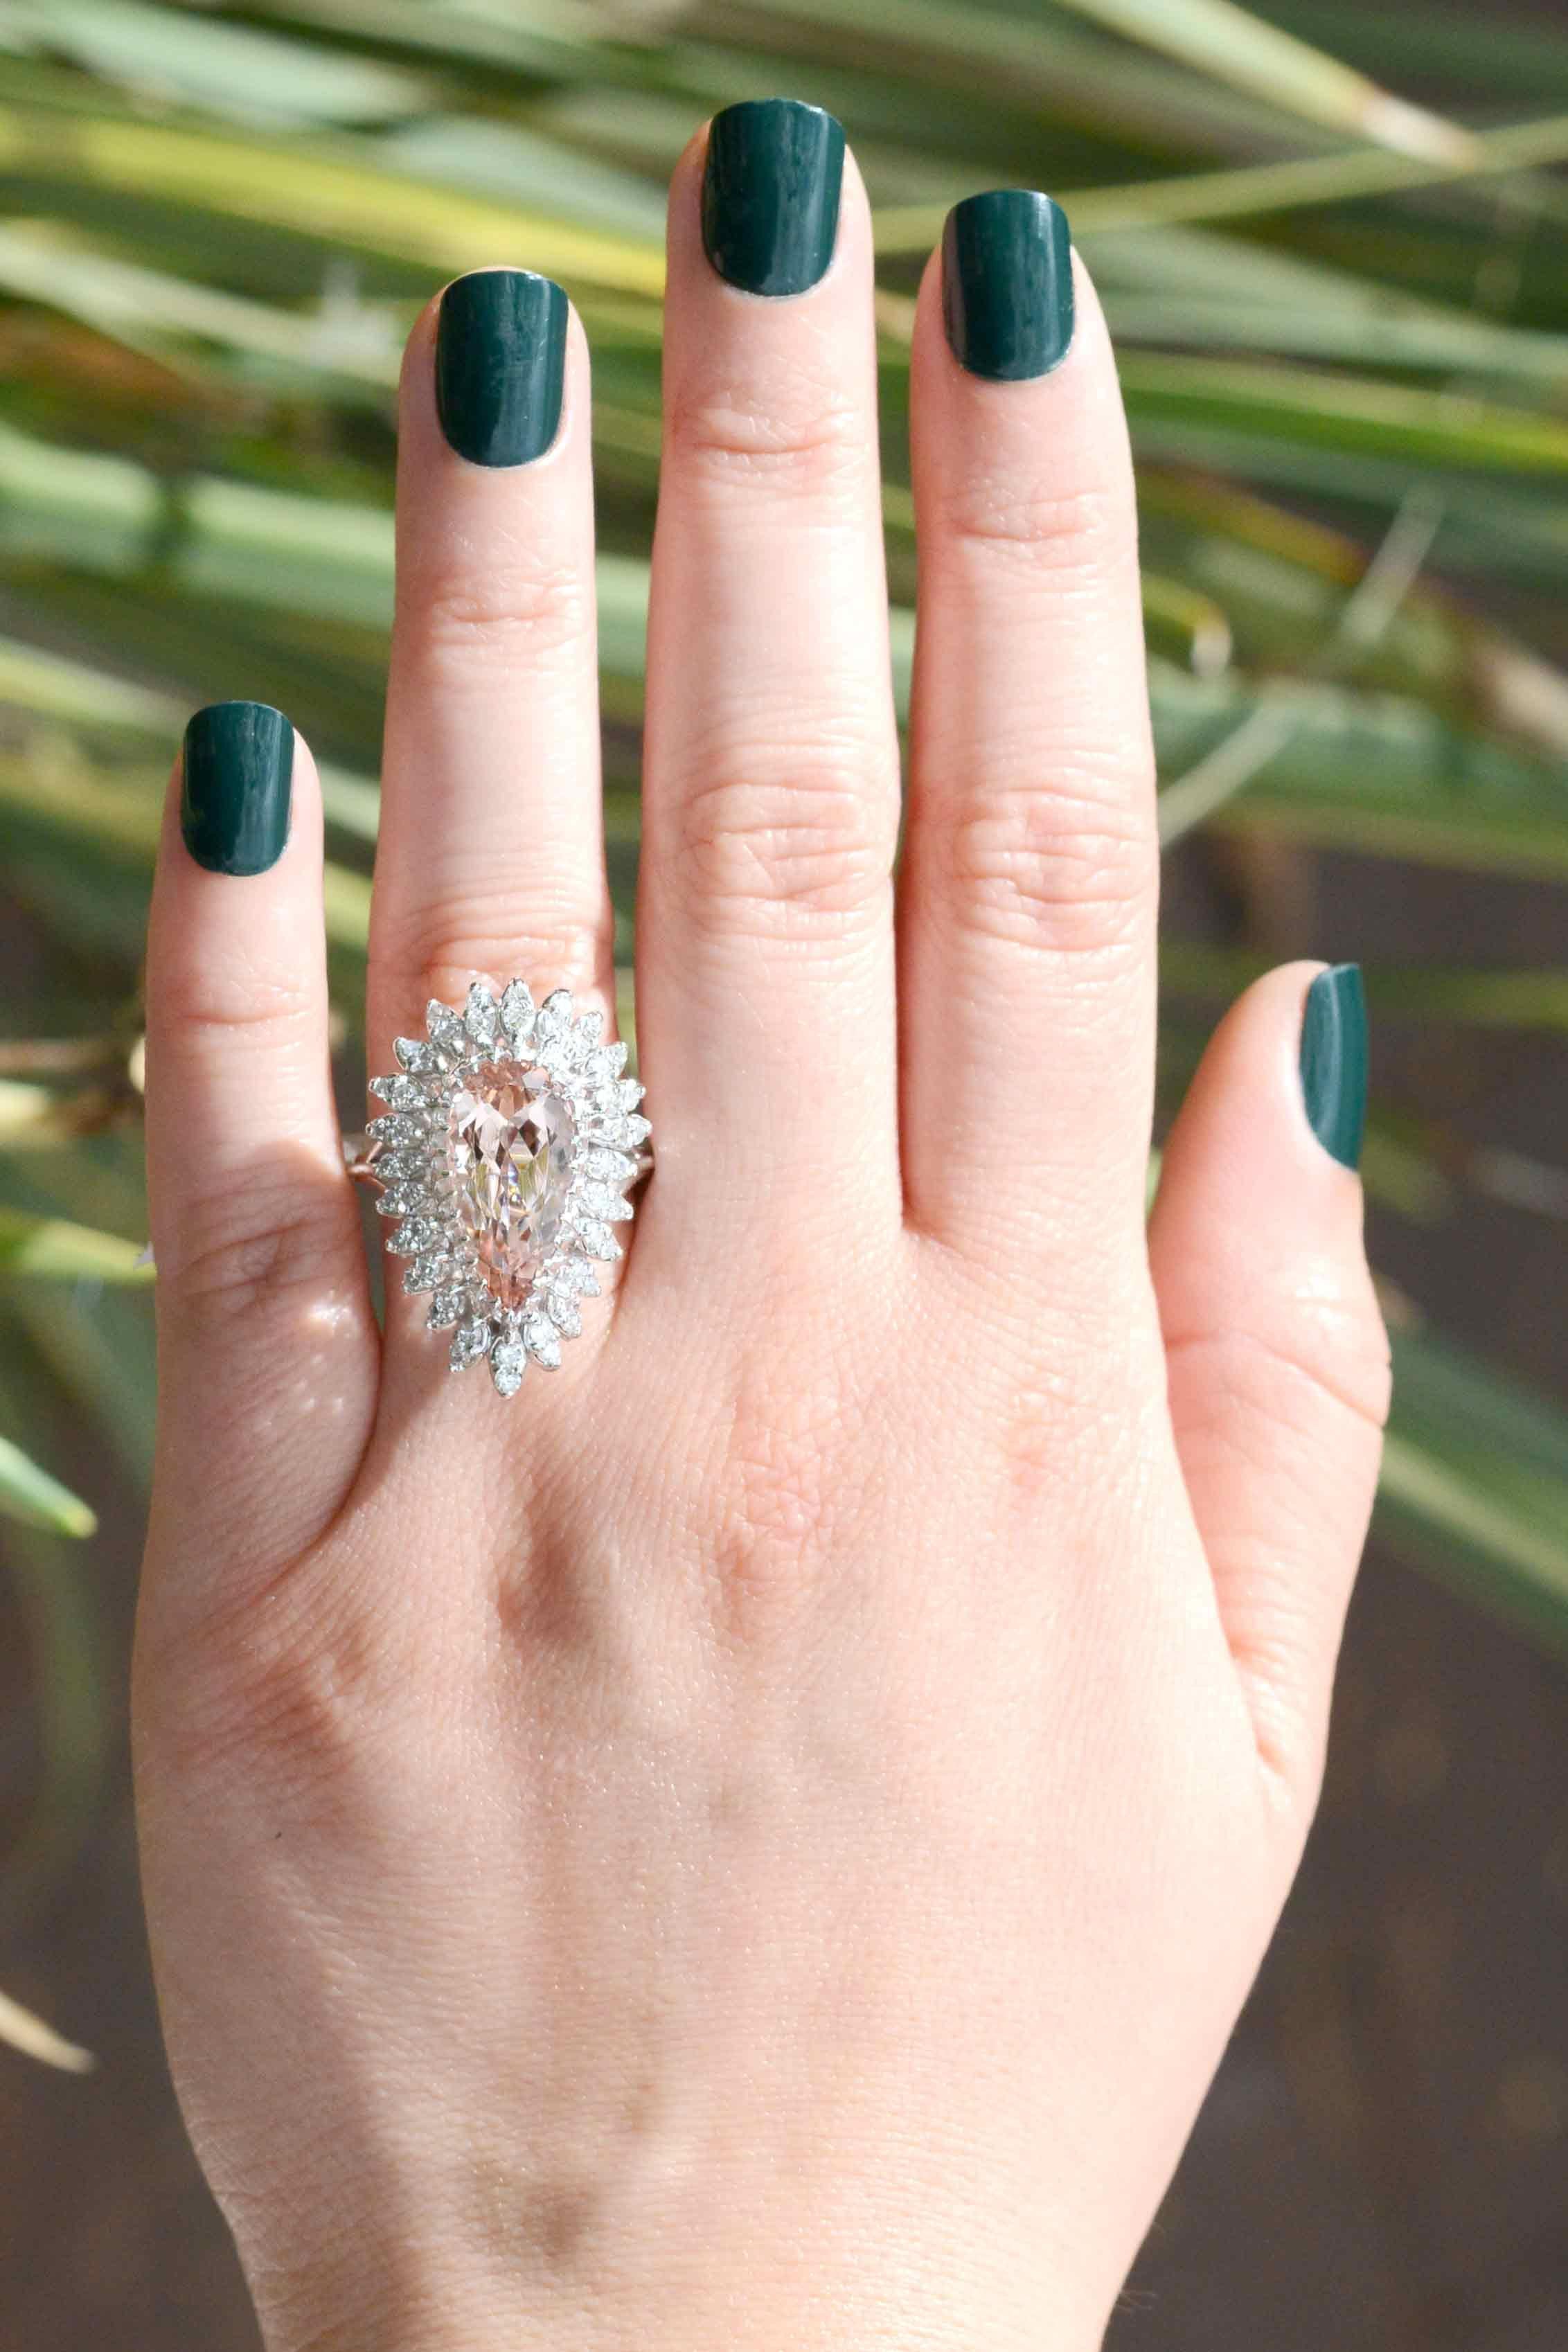 The Rosie 5 carat pear shape morganite ballerina cocktail ring. This is an awesome statement piece, vintage 1970s Hollywood glam at it's best. Centered by a captivating, sunset-peach natural gemstone of the beryl family (which includes aquamarine